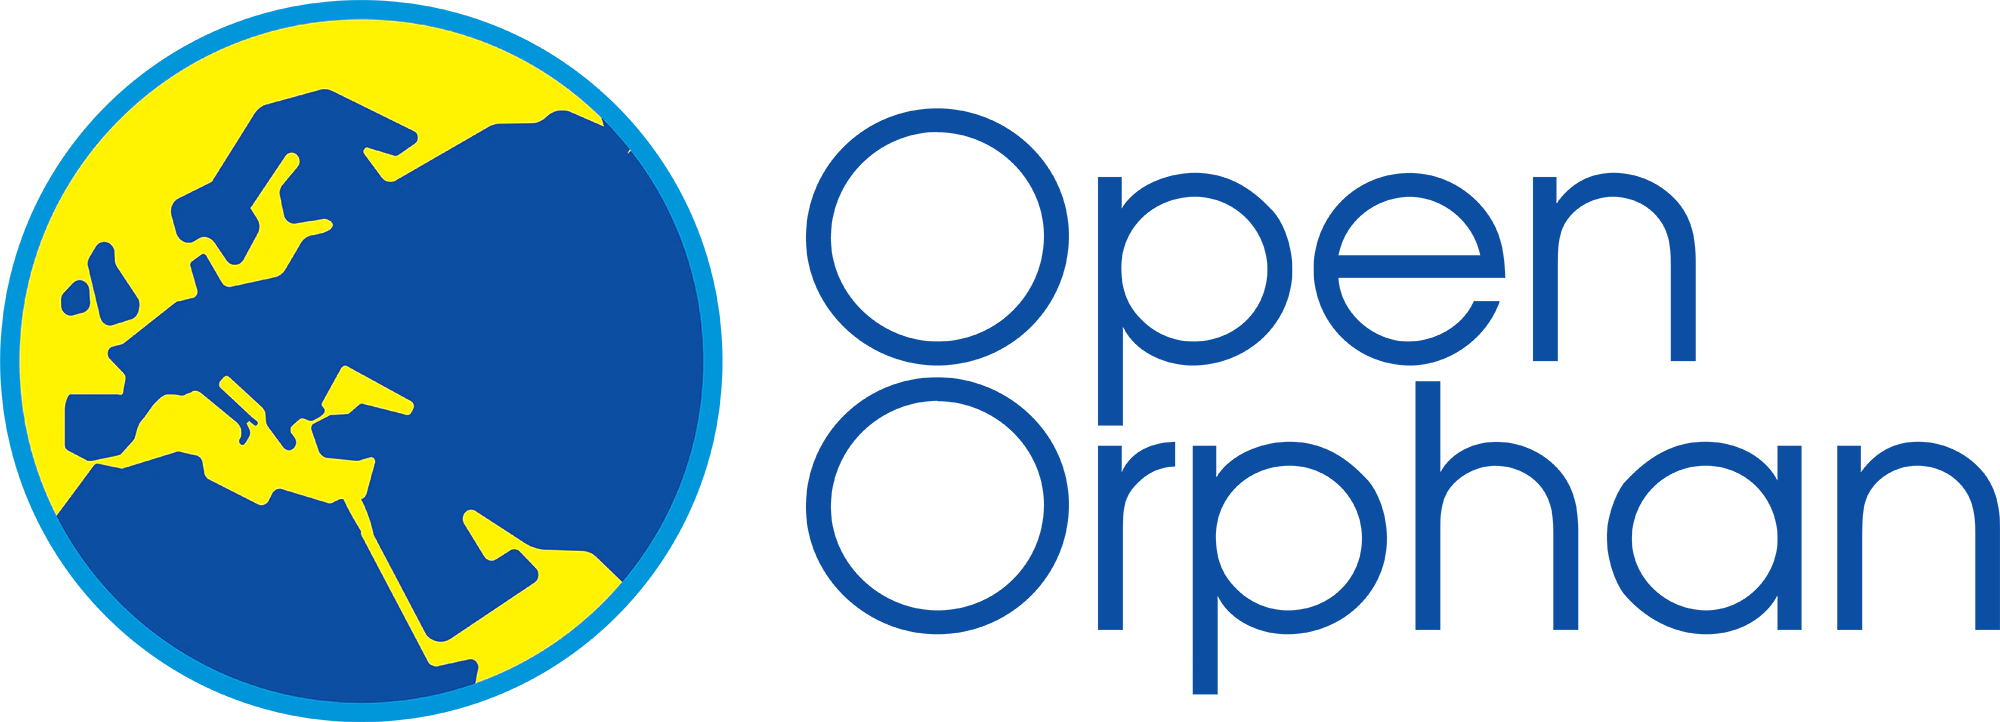 Open Orphan Logo which Includes an image of the globe